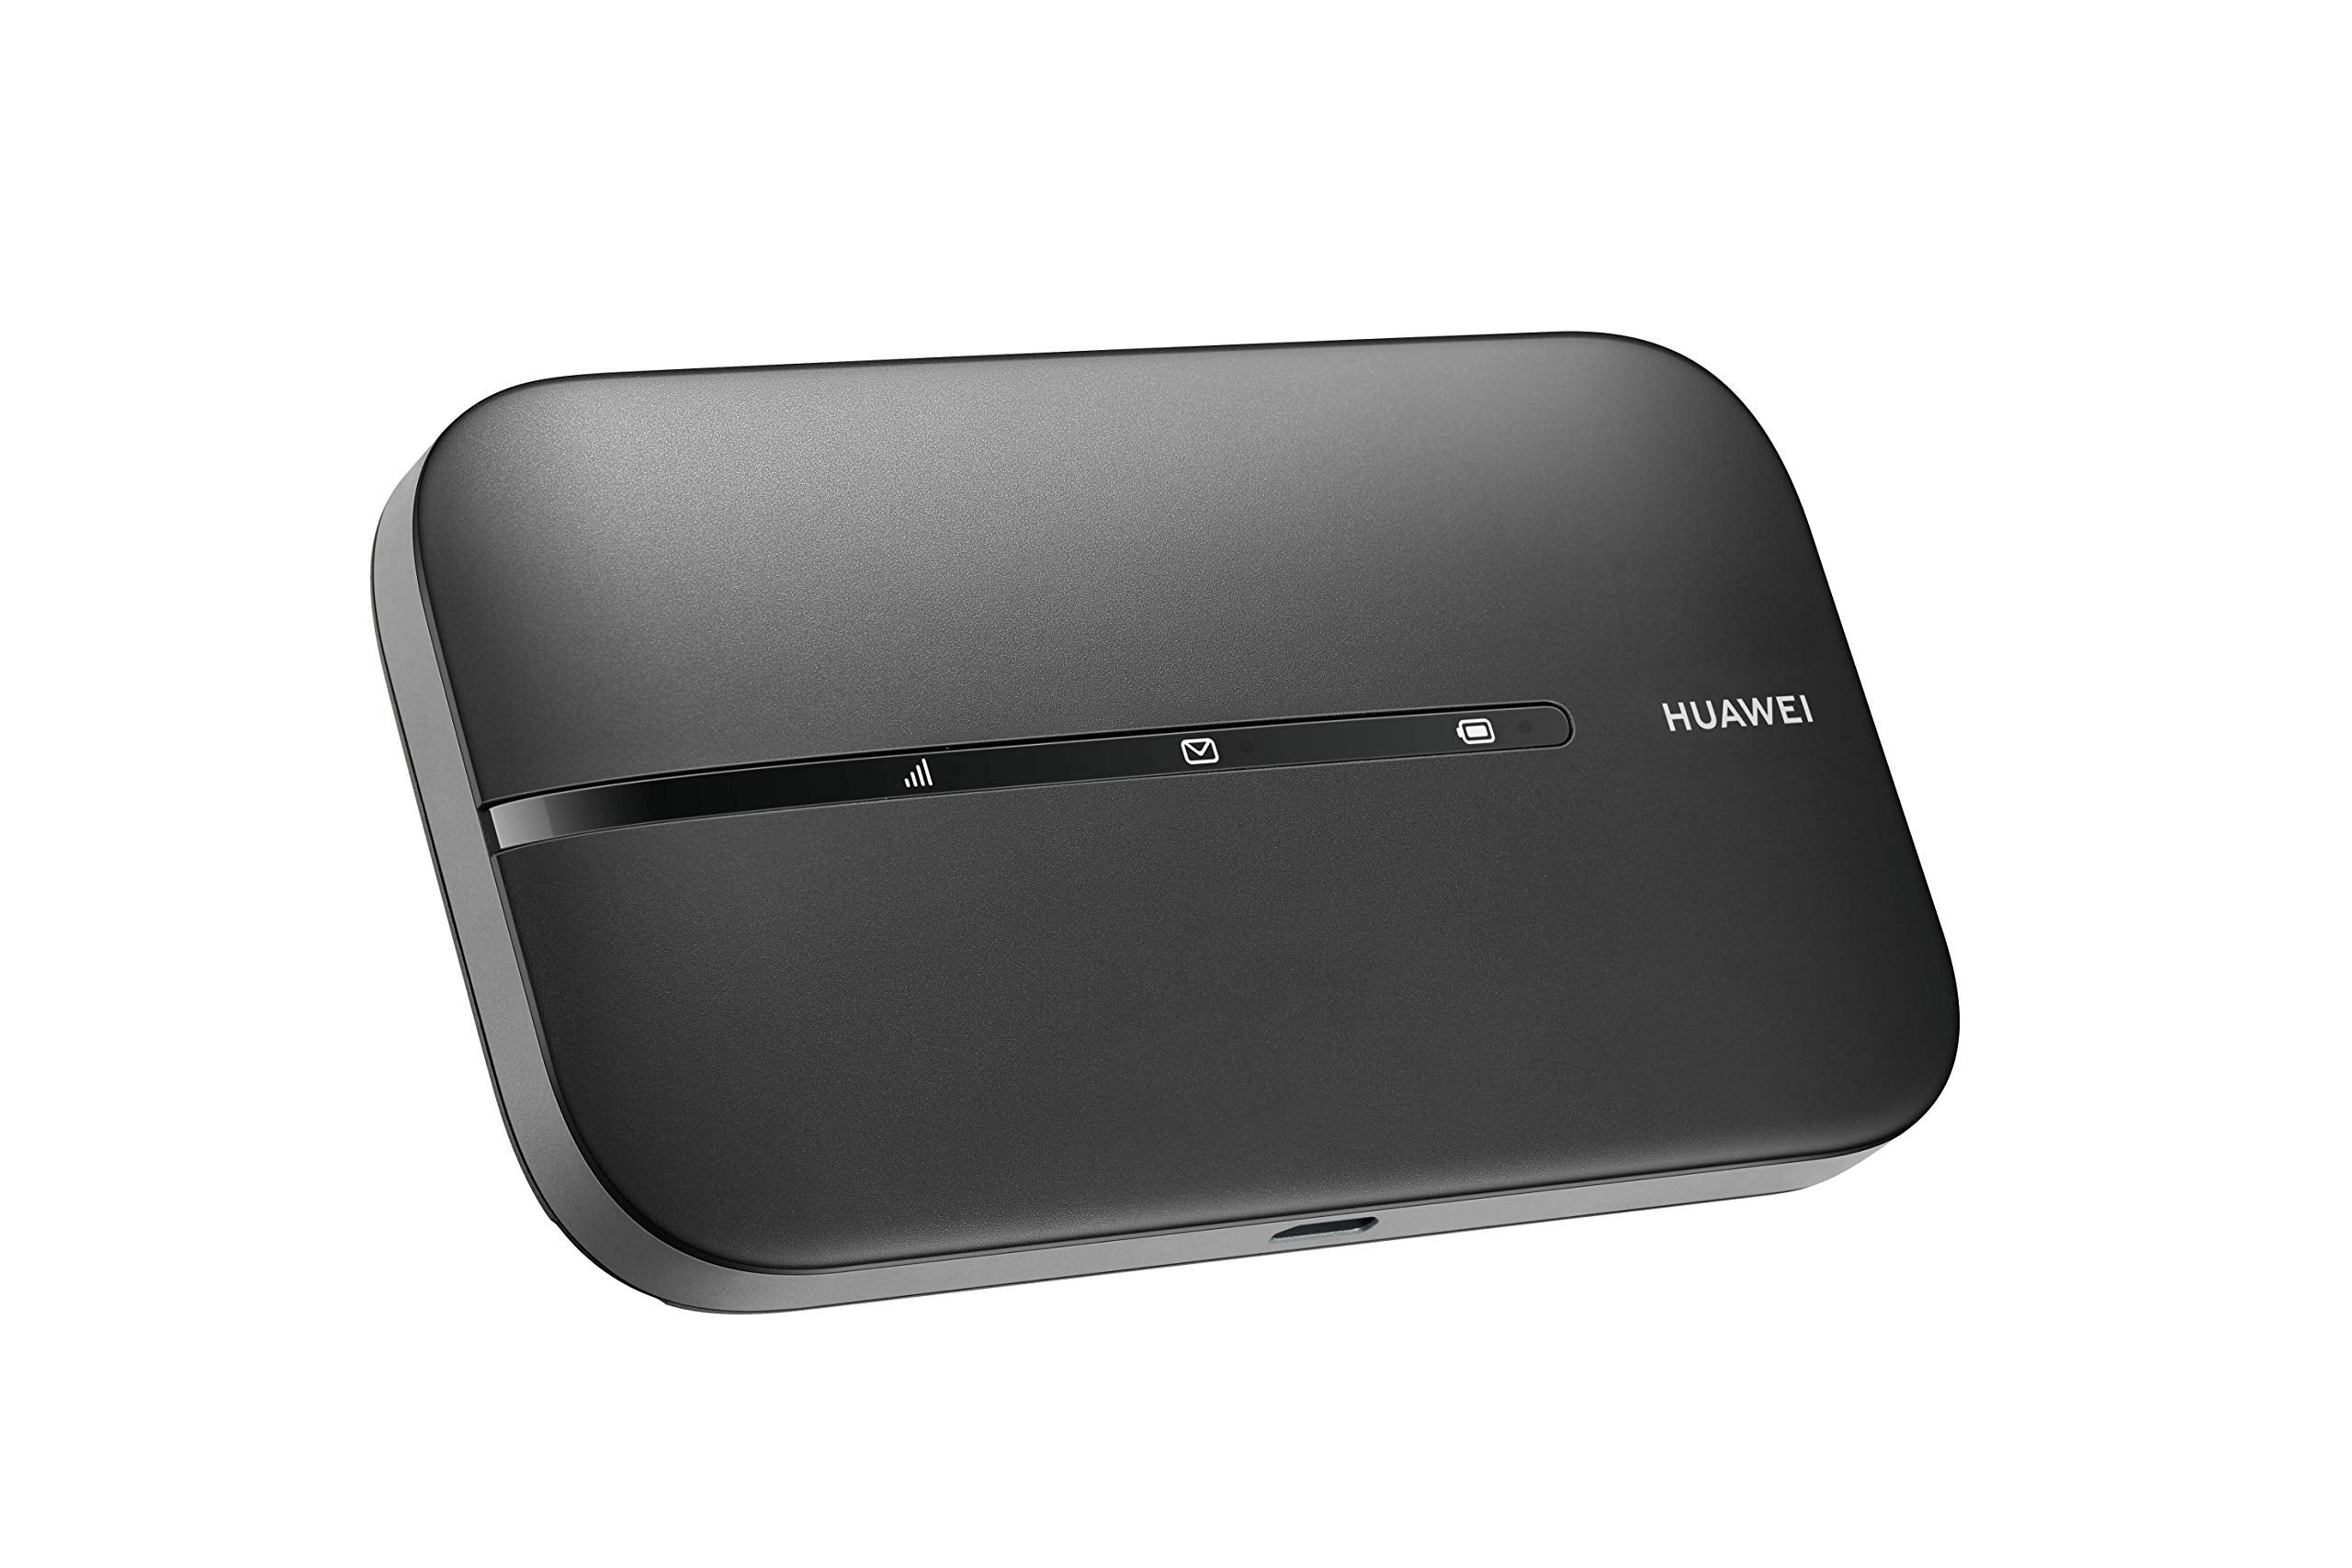 Huawei E5783 (Black) 300Mbps CAT 7 4G/LTE Travel Mobile Wi-Fi Hotspot. Works with any Sim Card Worldwide. Connect 16 Wireless devices. No config required (Renewed) (E5783B-230 (1500mAh Battery))